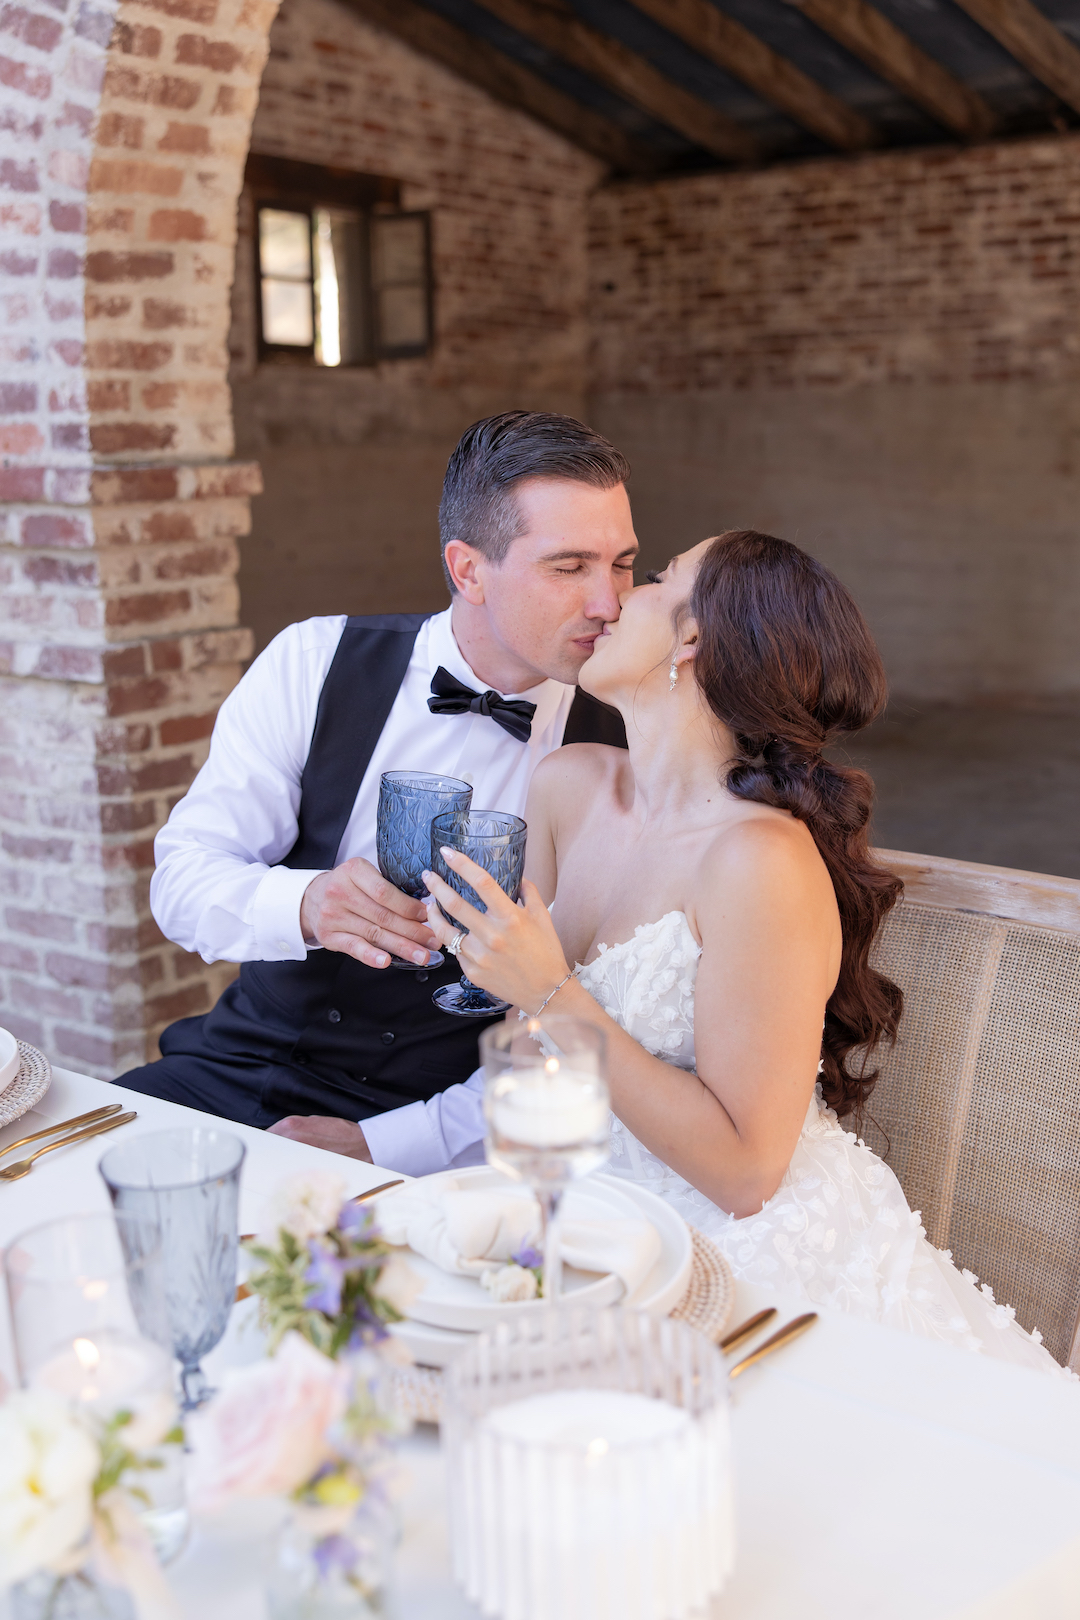 Bride and groom clinking blue stained glass cups and sharing a kiss at their wedding sweetheart table. 